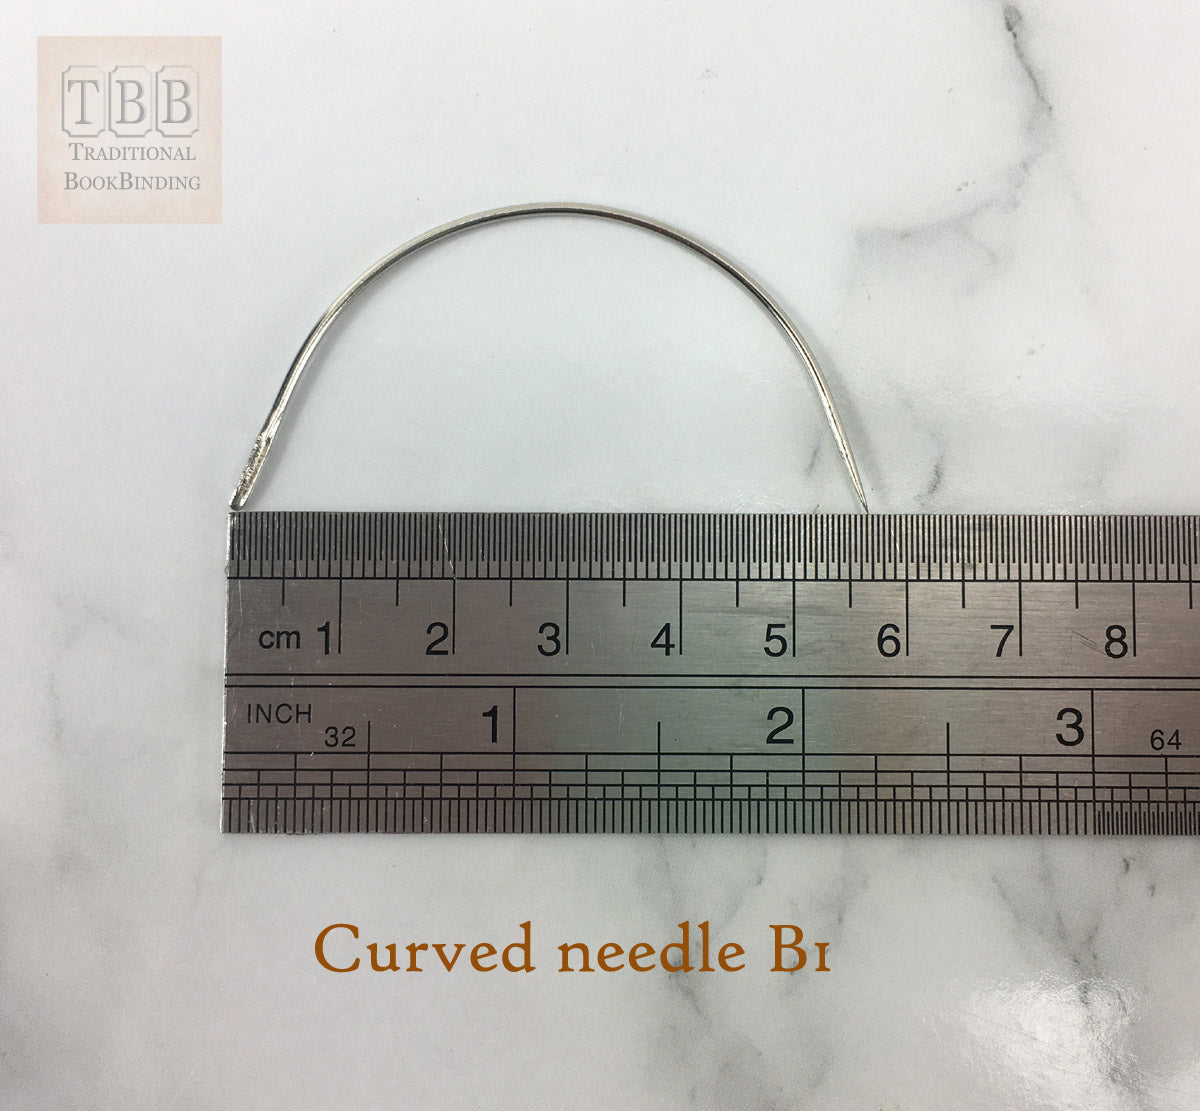 Wholesale- Bookbinding Needle- Sturdily made for bookbinding- Large eye and small eye with long shaft- 8 options